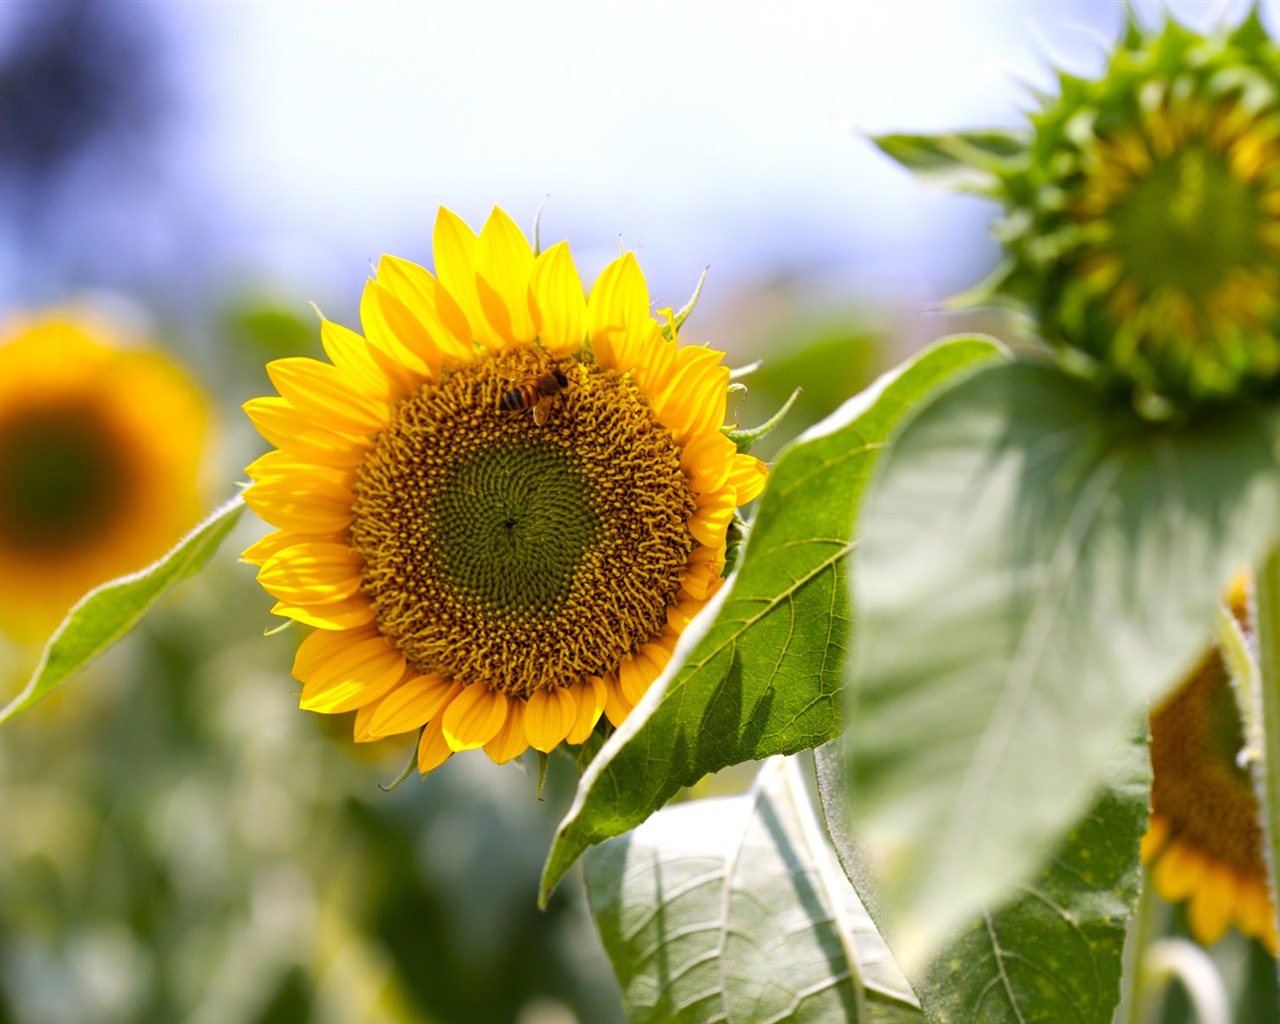 Sunny sunflower photo HD Wallpapers #21 - 1280x1024